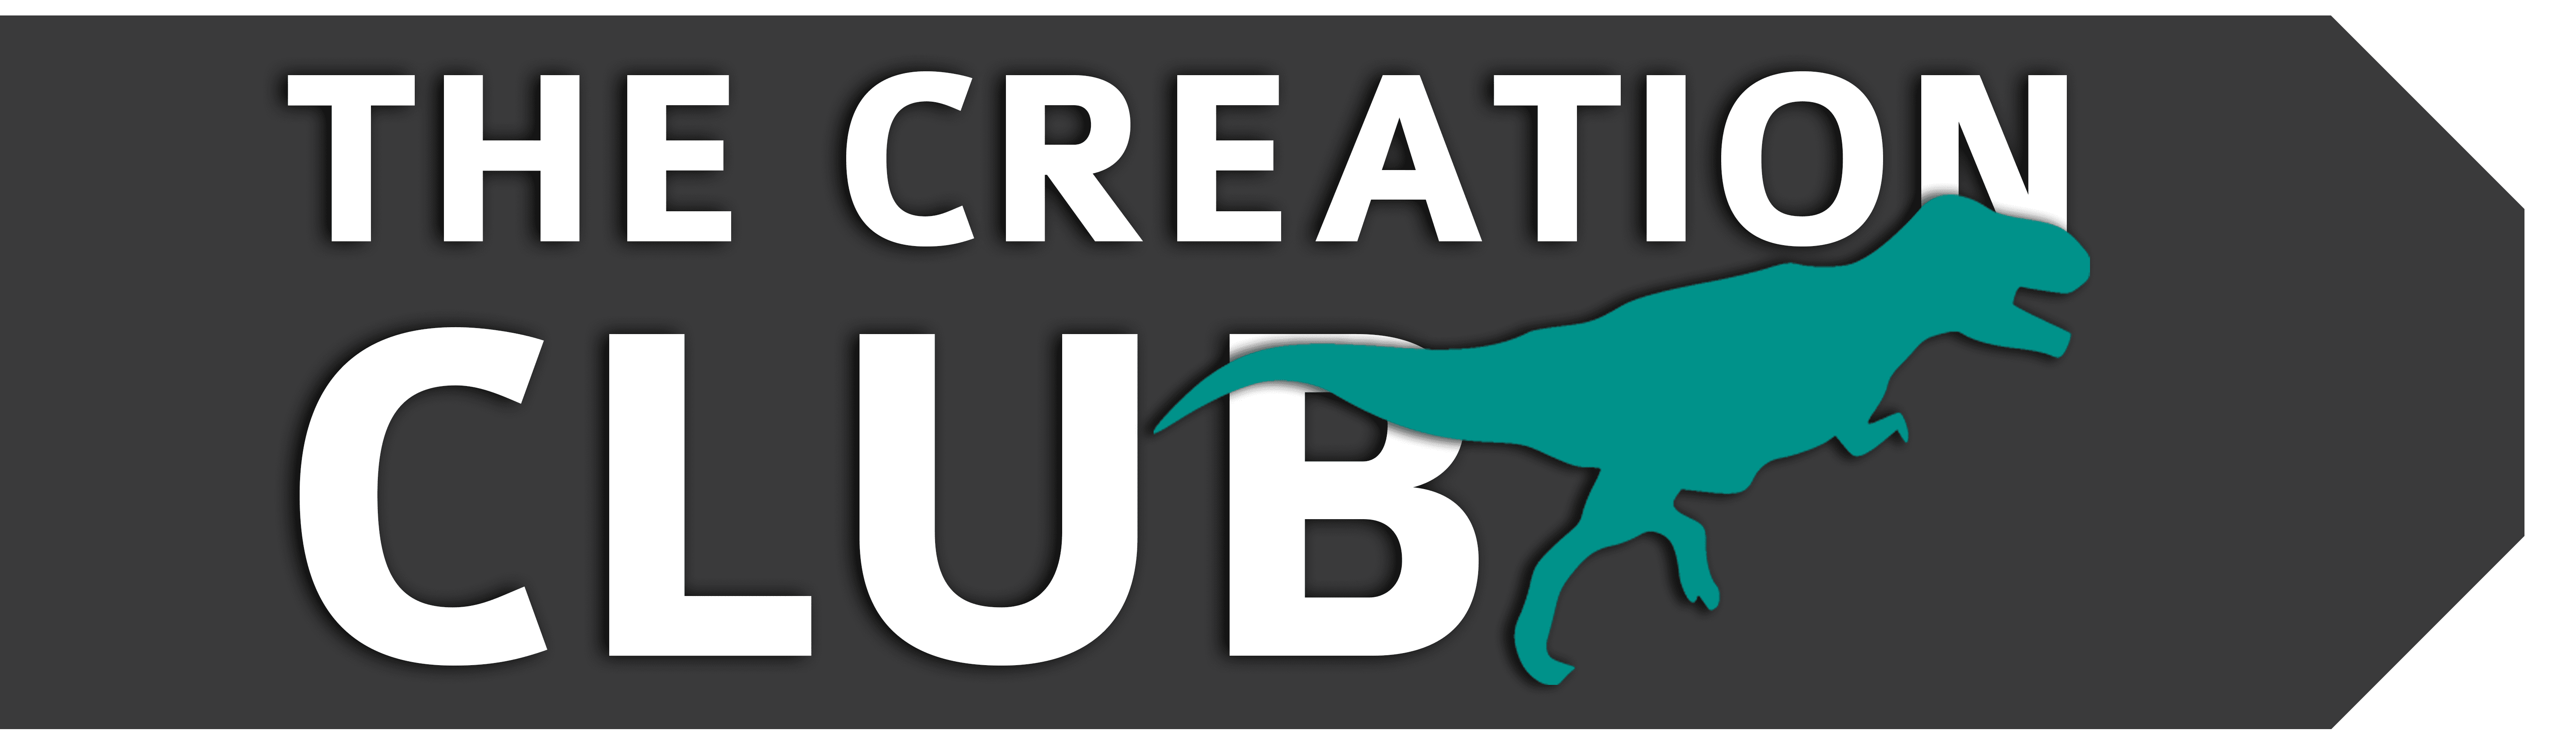 The Creation Club | A Place for Biblical Creationists to Share and Learn